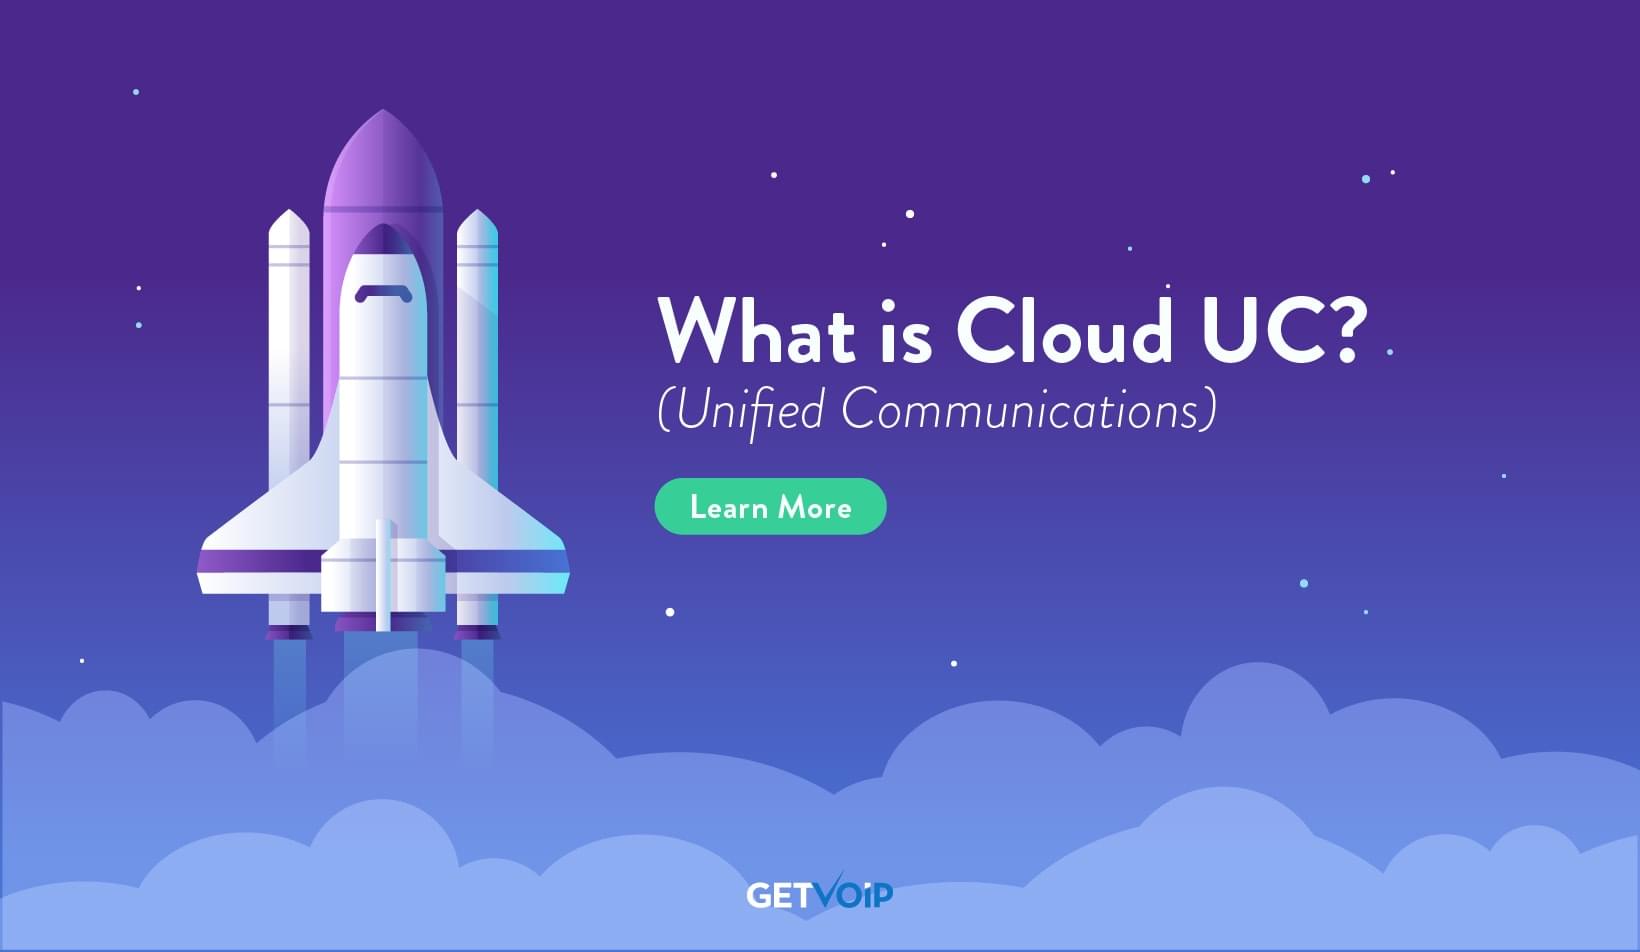 What is Cloud UC?